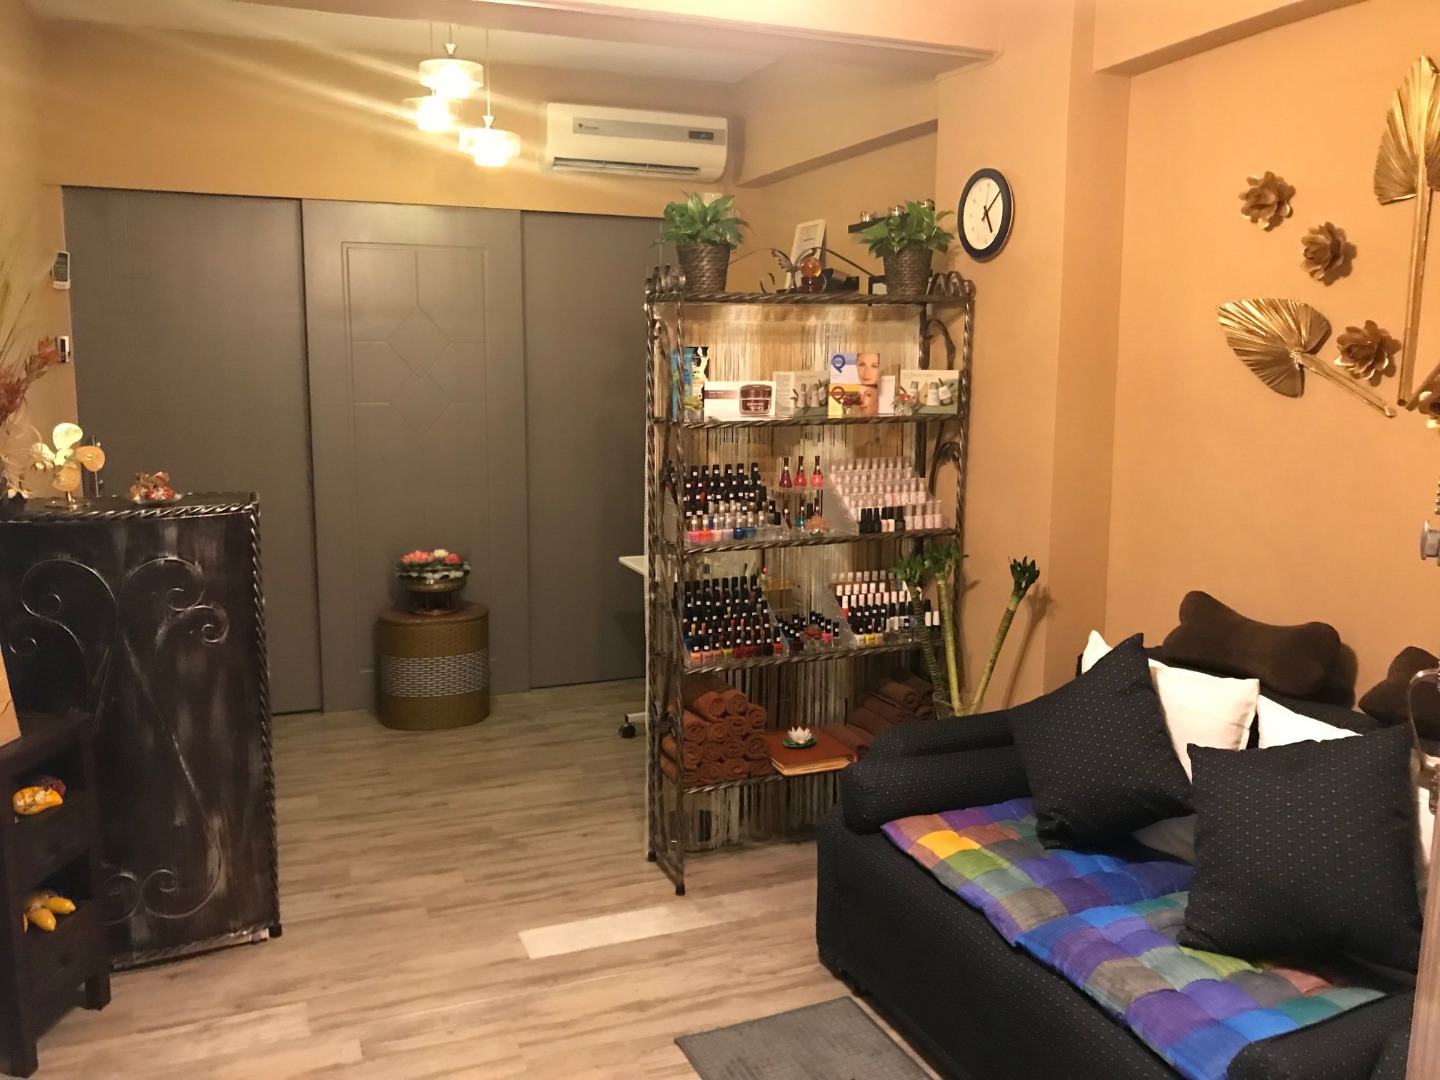 Dvaree Spa And Beauty Beauty And Massage Salon In Sheung Wan Lookdiary